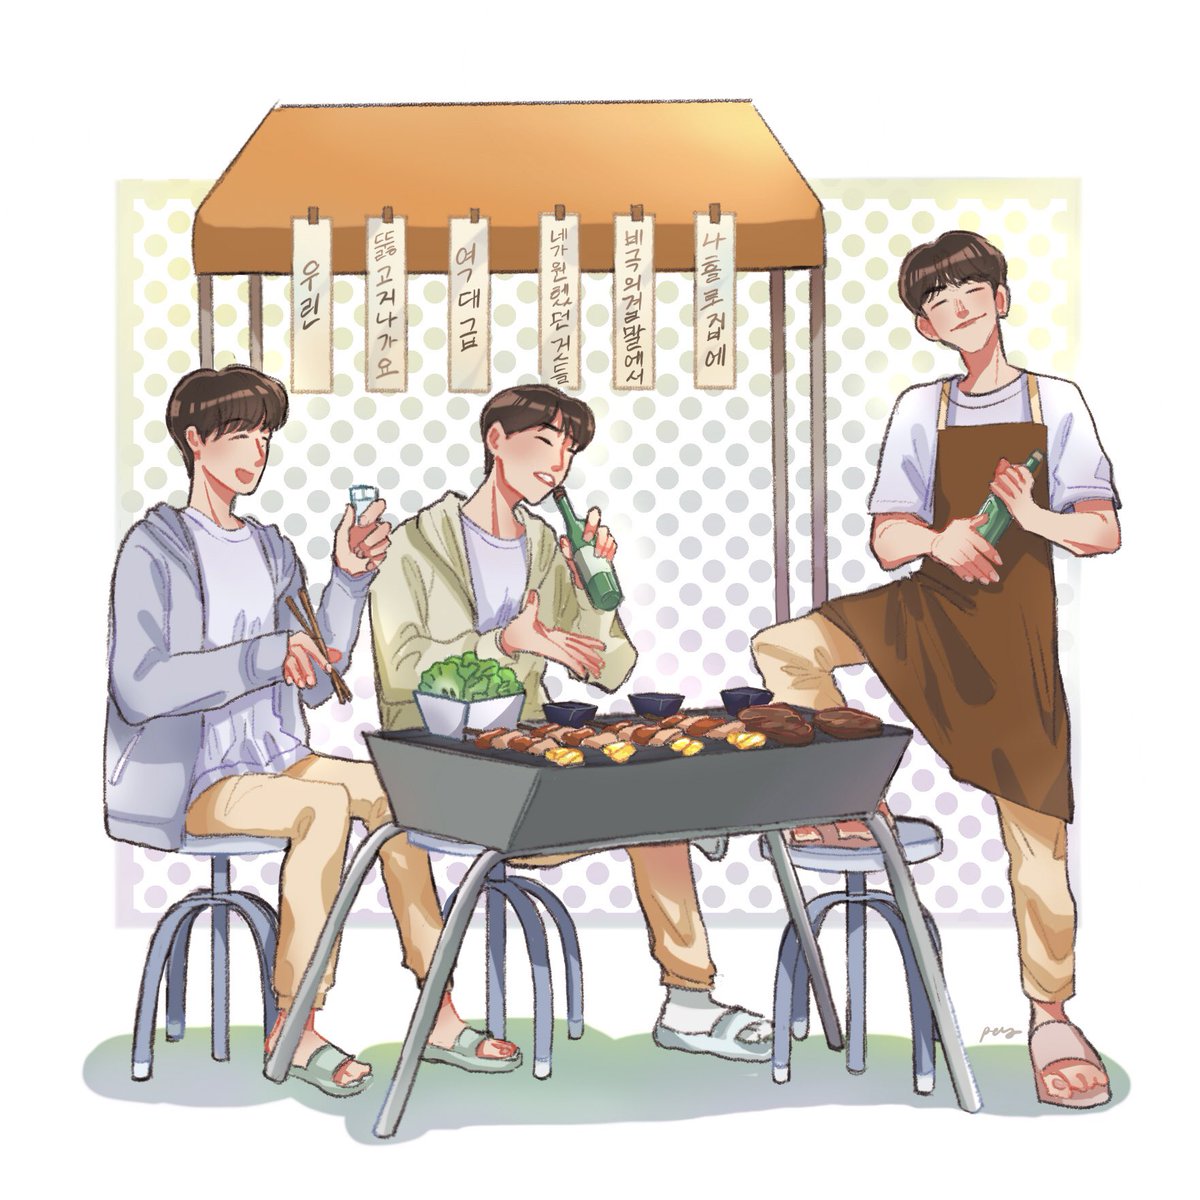 Cheers 🥂💕✨
#DOWOON #YoungK #Wonpil #day6fanart #day6thfanart